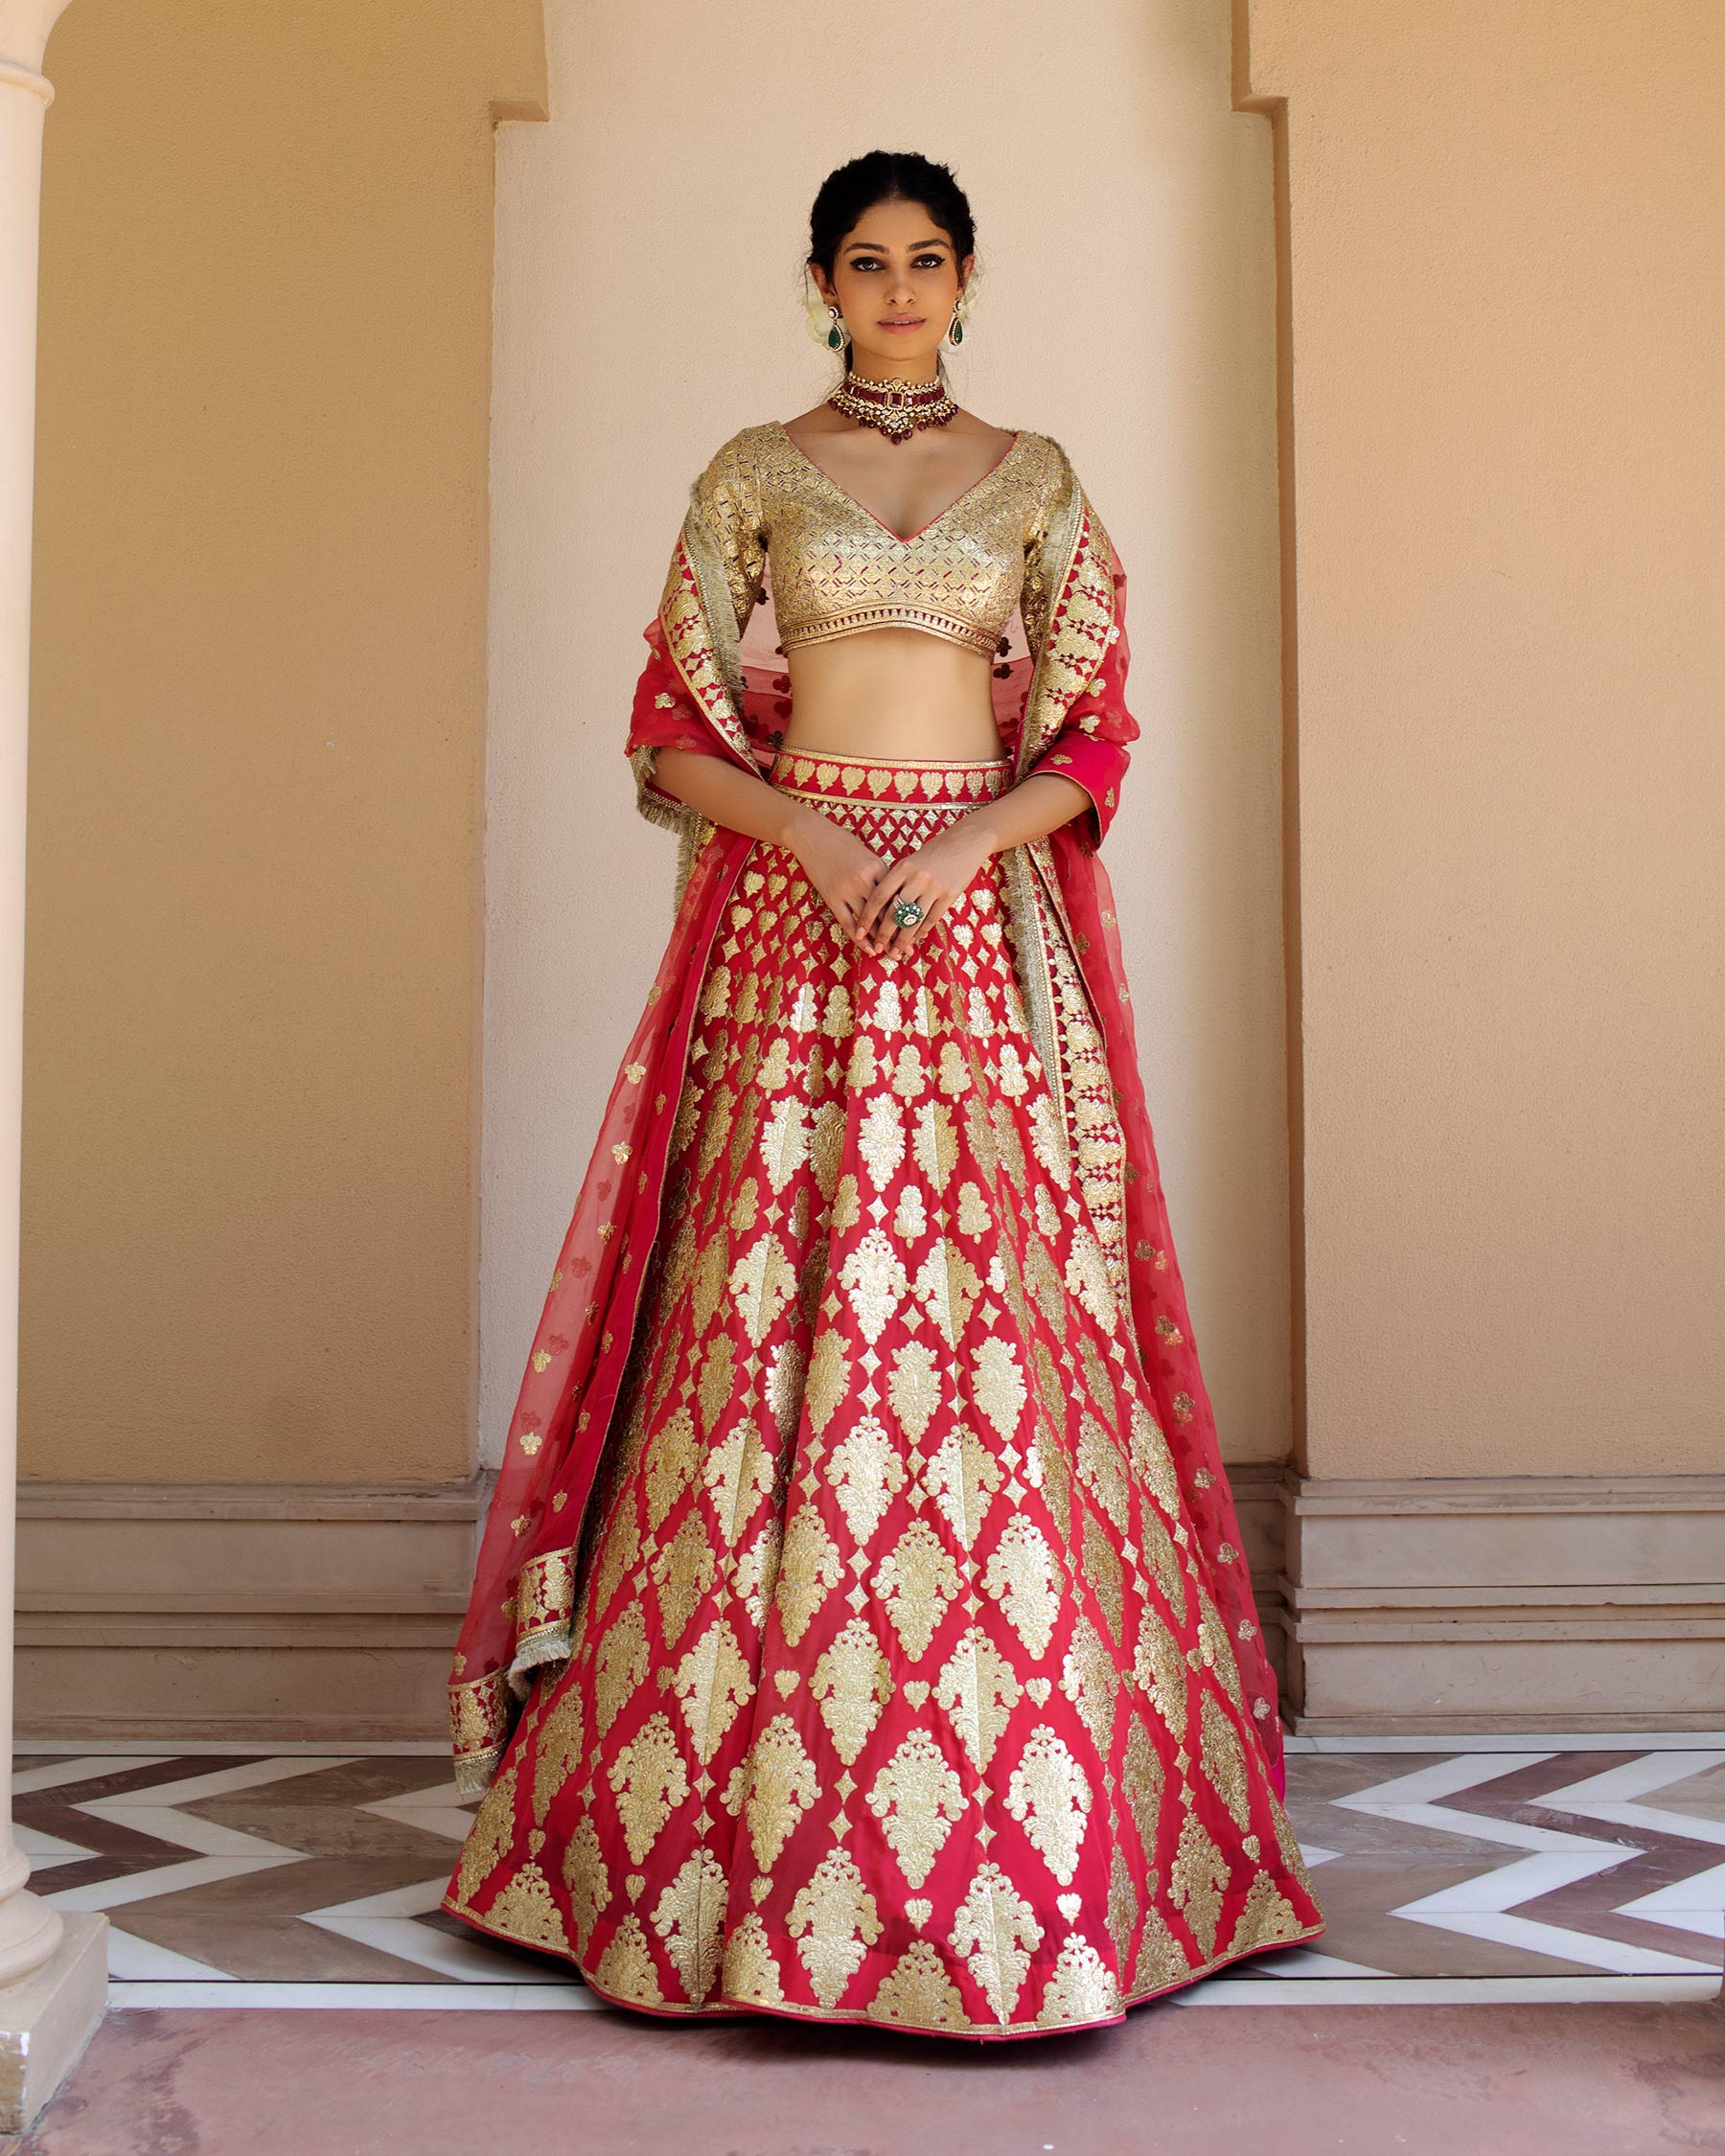 Photo of Bride twirling in red and gold lehenga with green jewellery